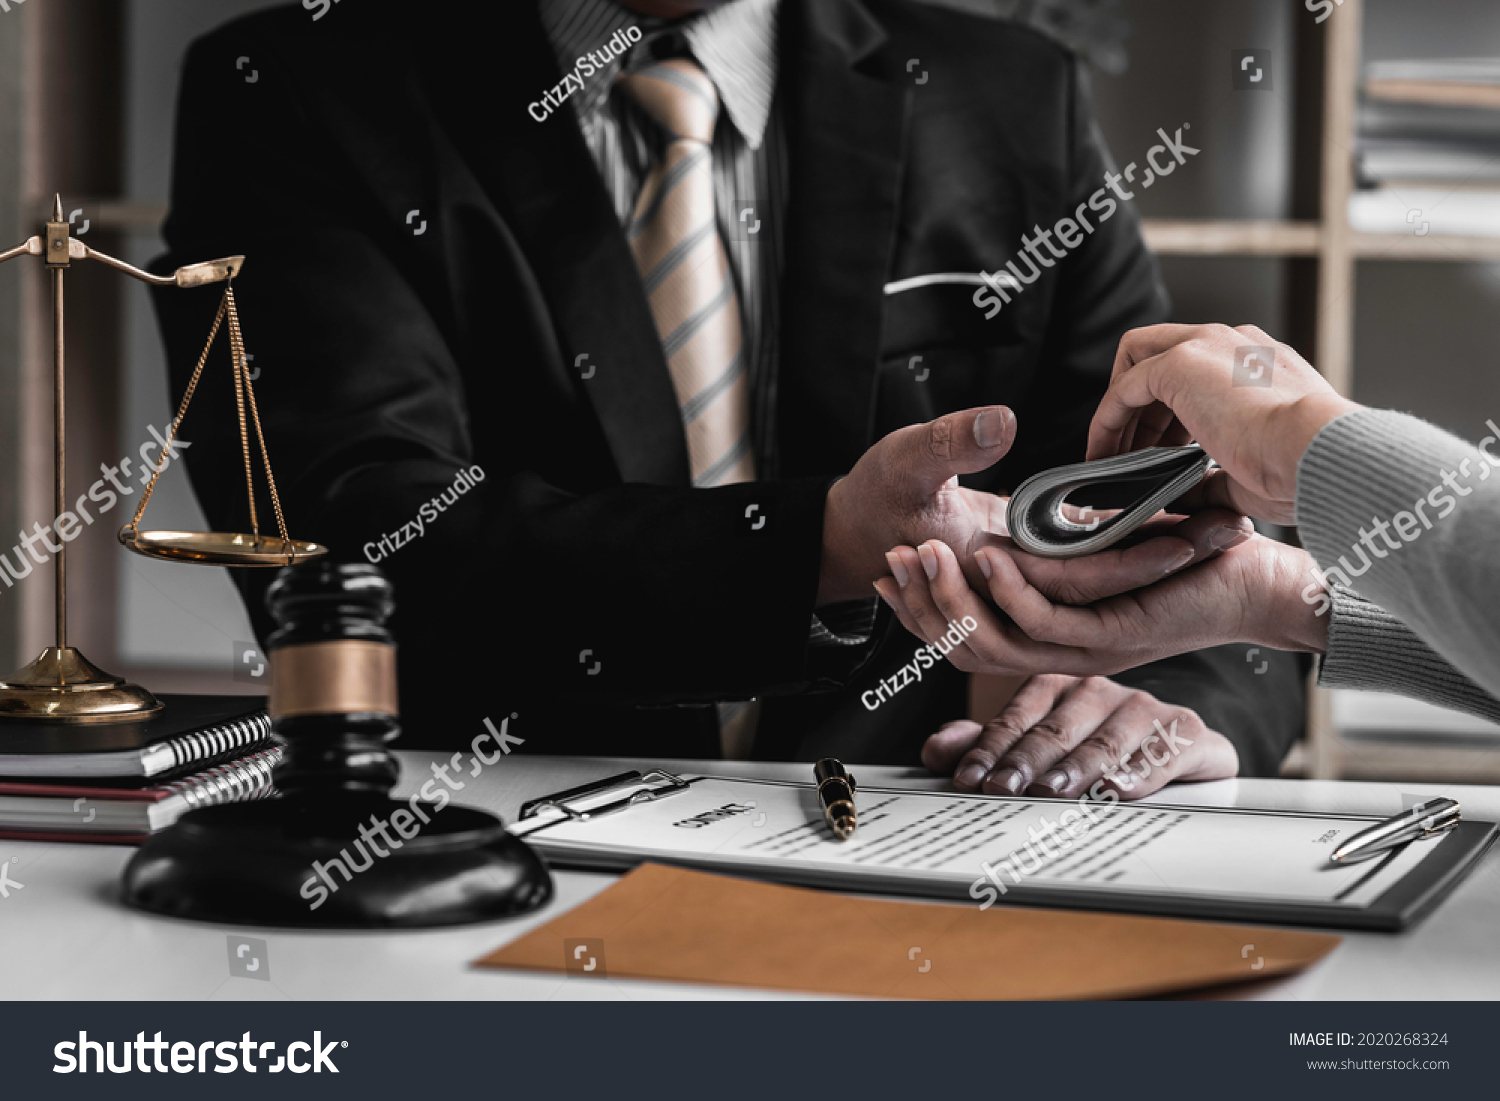 lawyer taking dollar bribe from the female client for falsifying documents, businessman taking bribes corruption illegal fraud bribery concept. #2020268324